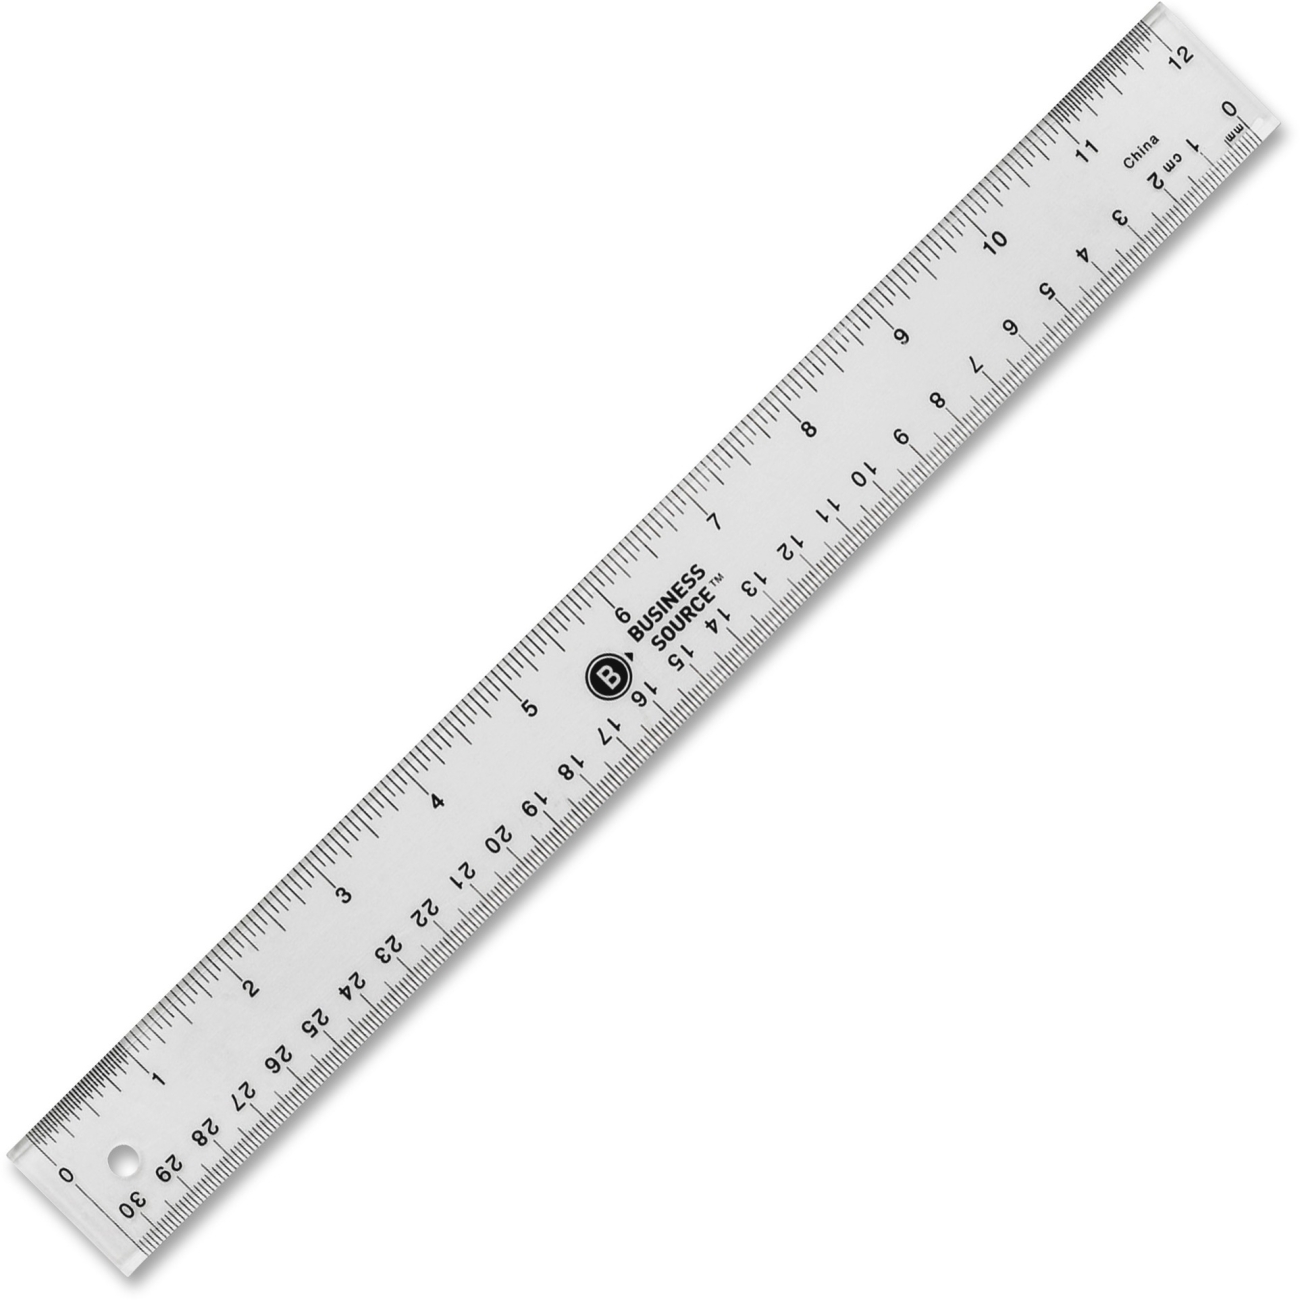 17-best-images-of-measuring-1-16-inches-worksheets-measurement-worksheets-inches-to-feet